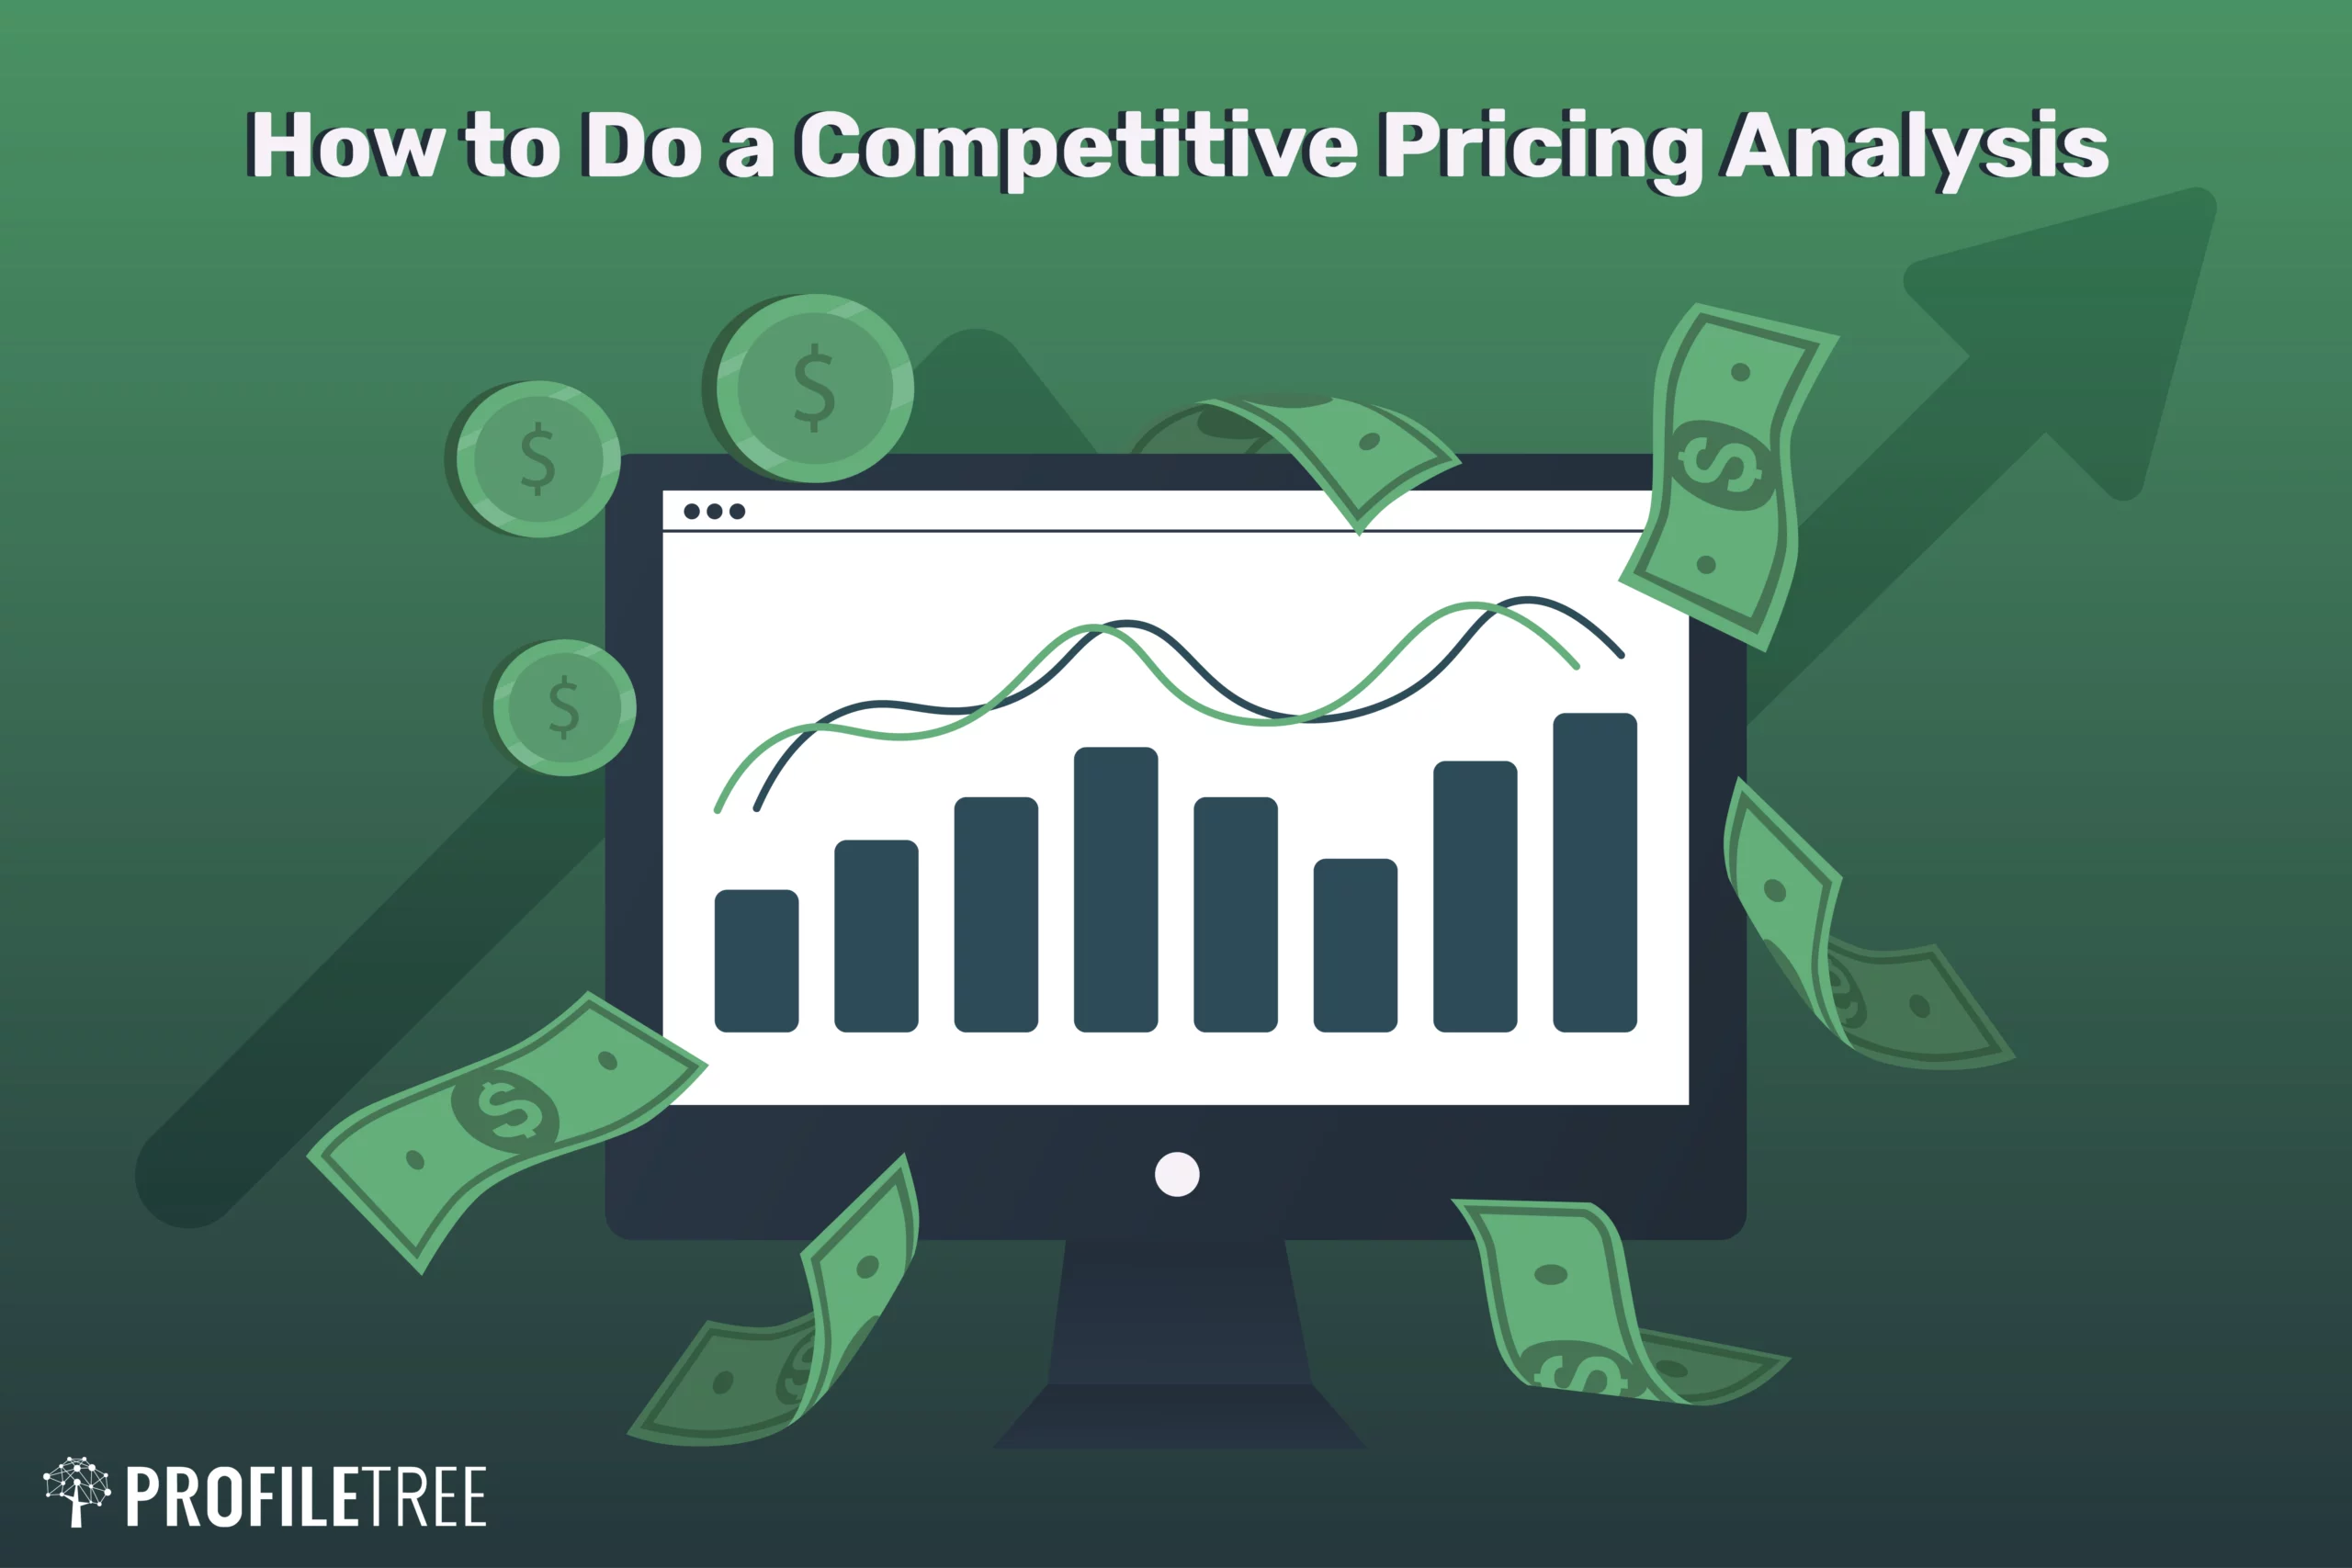 How to Do a Competitive Pricing Analysis